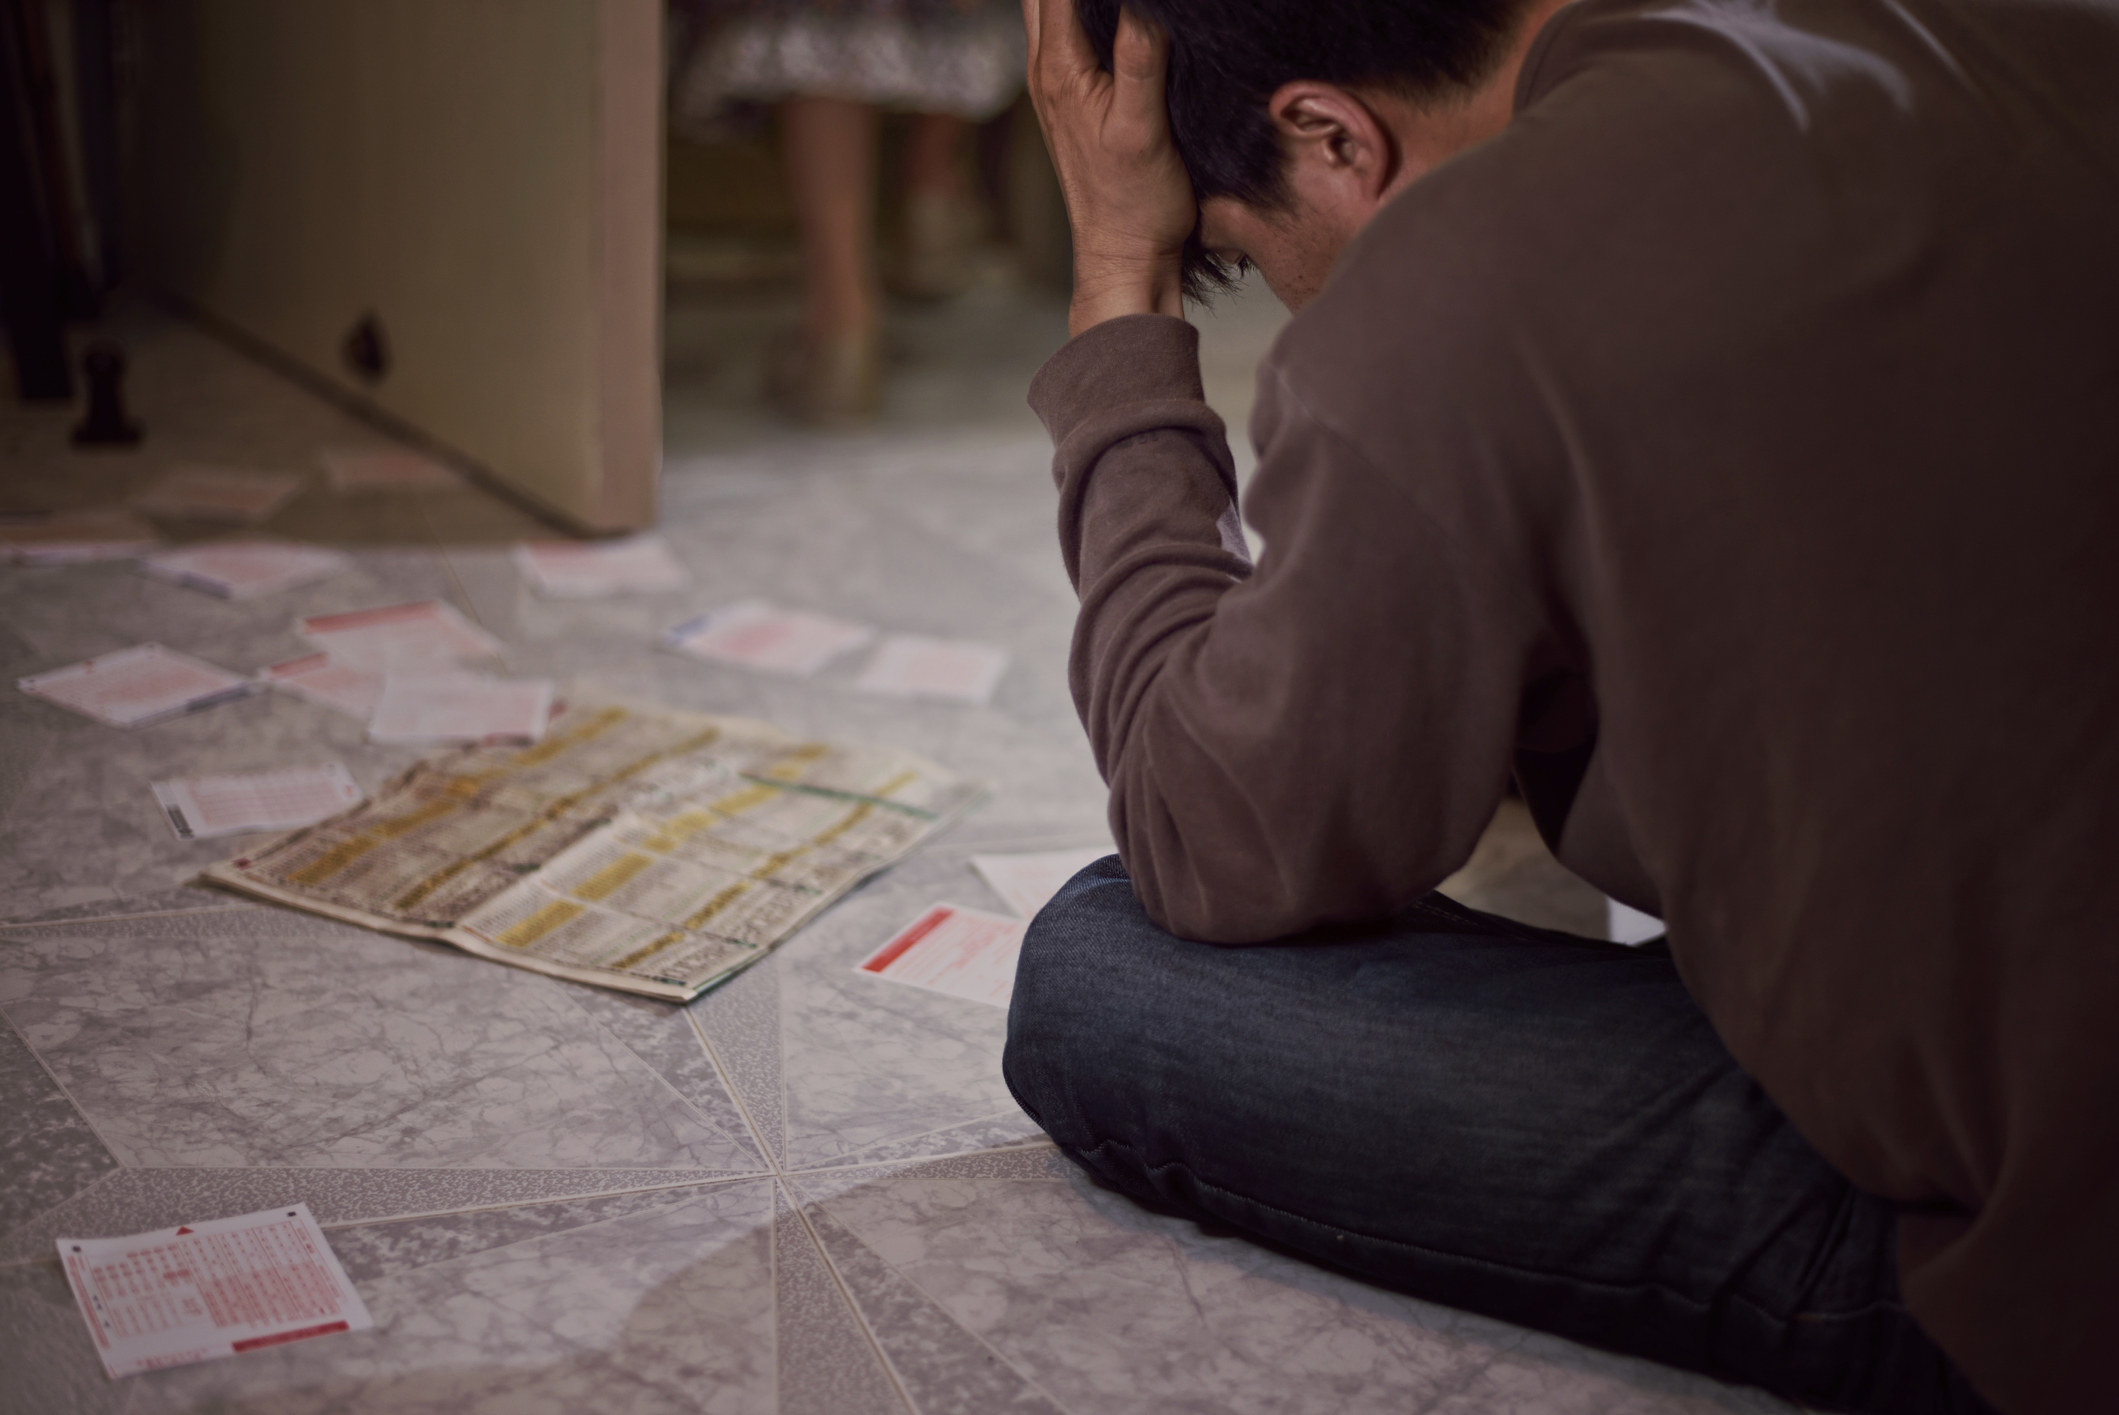 Someone sits on the floor devastated, surrounded by lottery tickets